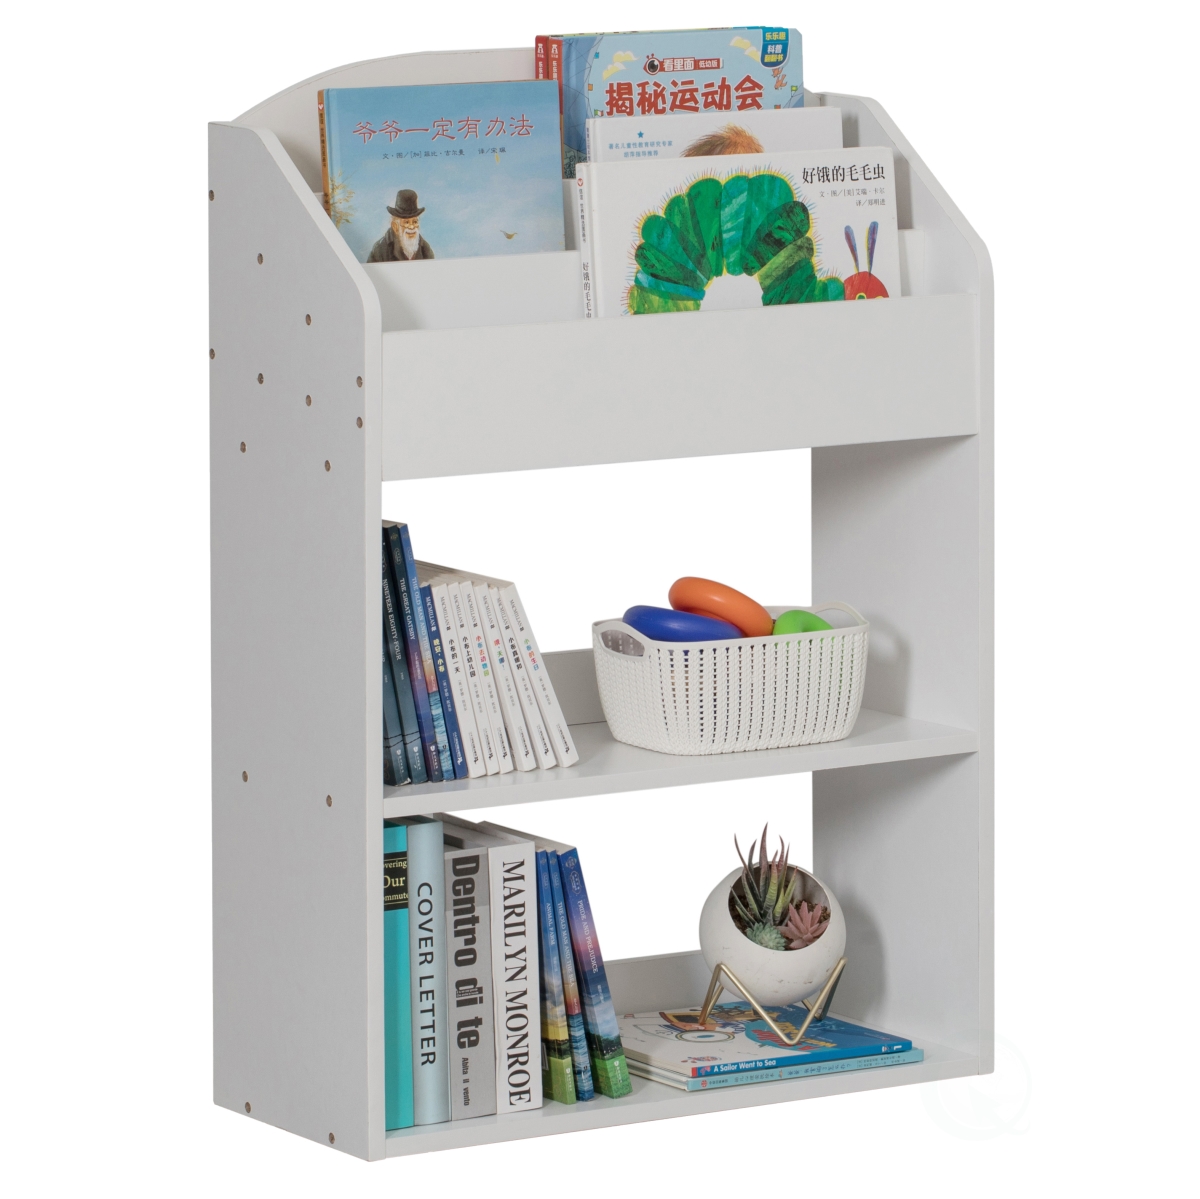 Picture of Basicwise QI004151.WT 33.5 x 23.5 x 9.5 in. Modern Wooden Storage Bookcase with Shelf for Playroom Bedroom Living & Office&#44; White